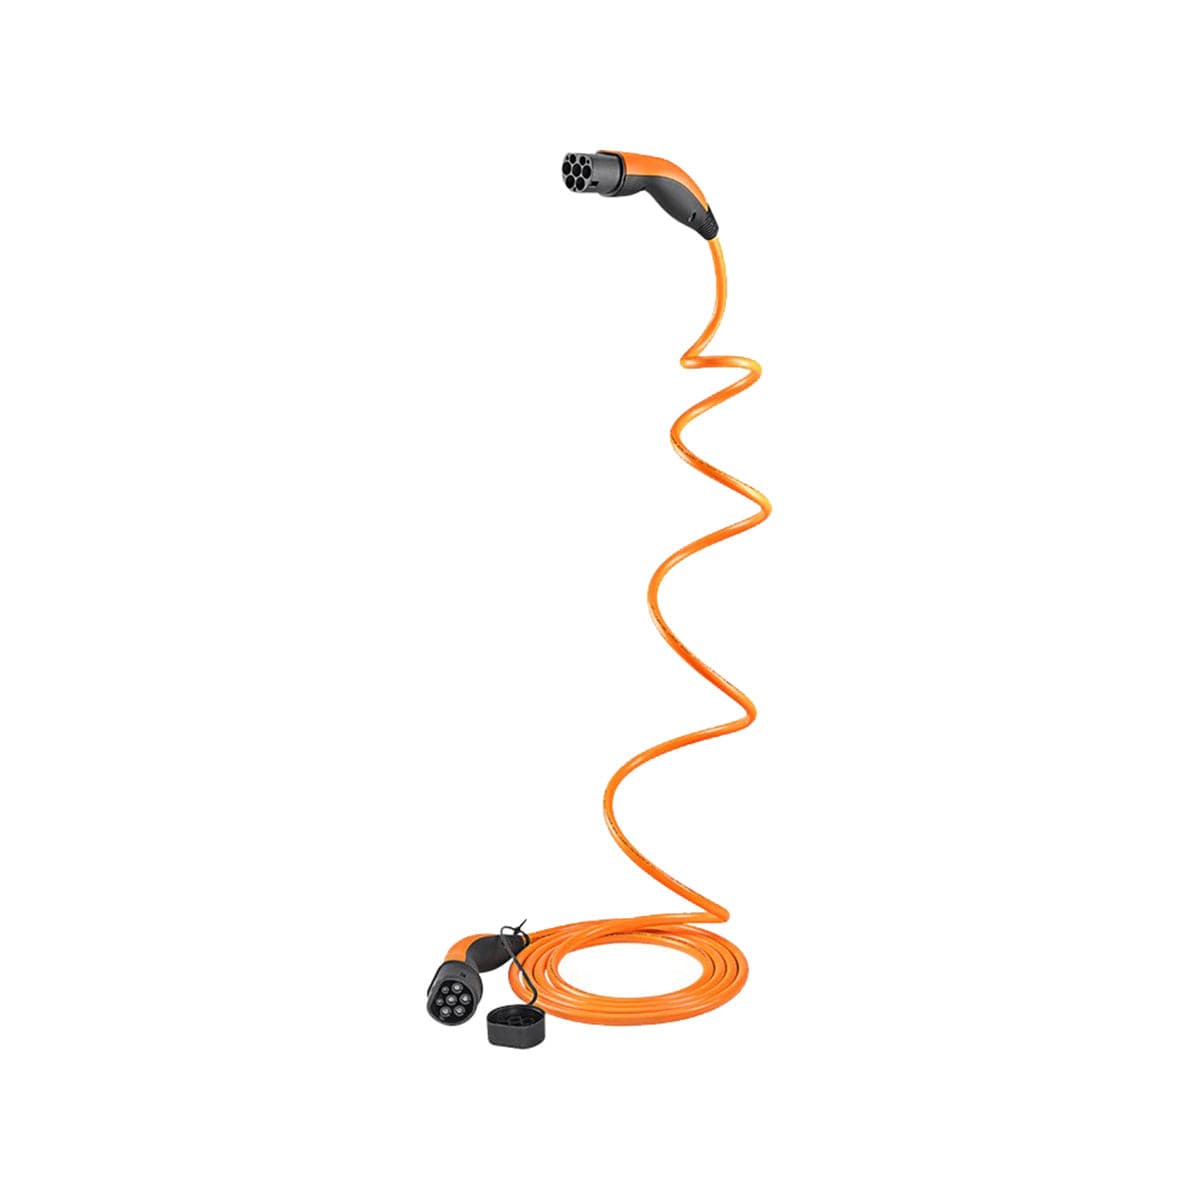 LAPP EV Helix Charge Cable Type 2 (22kW-3P-32A) 5m for Hybrid and Electric Cars - Orange.